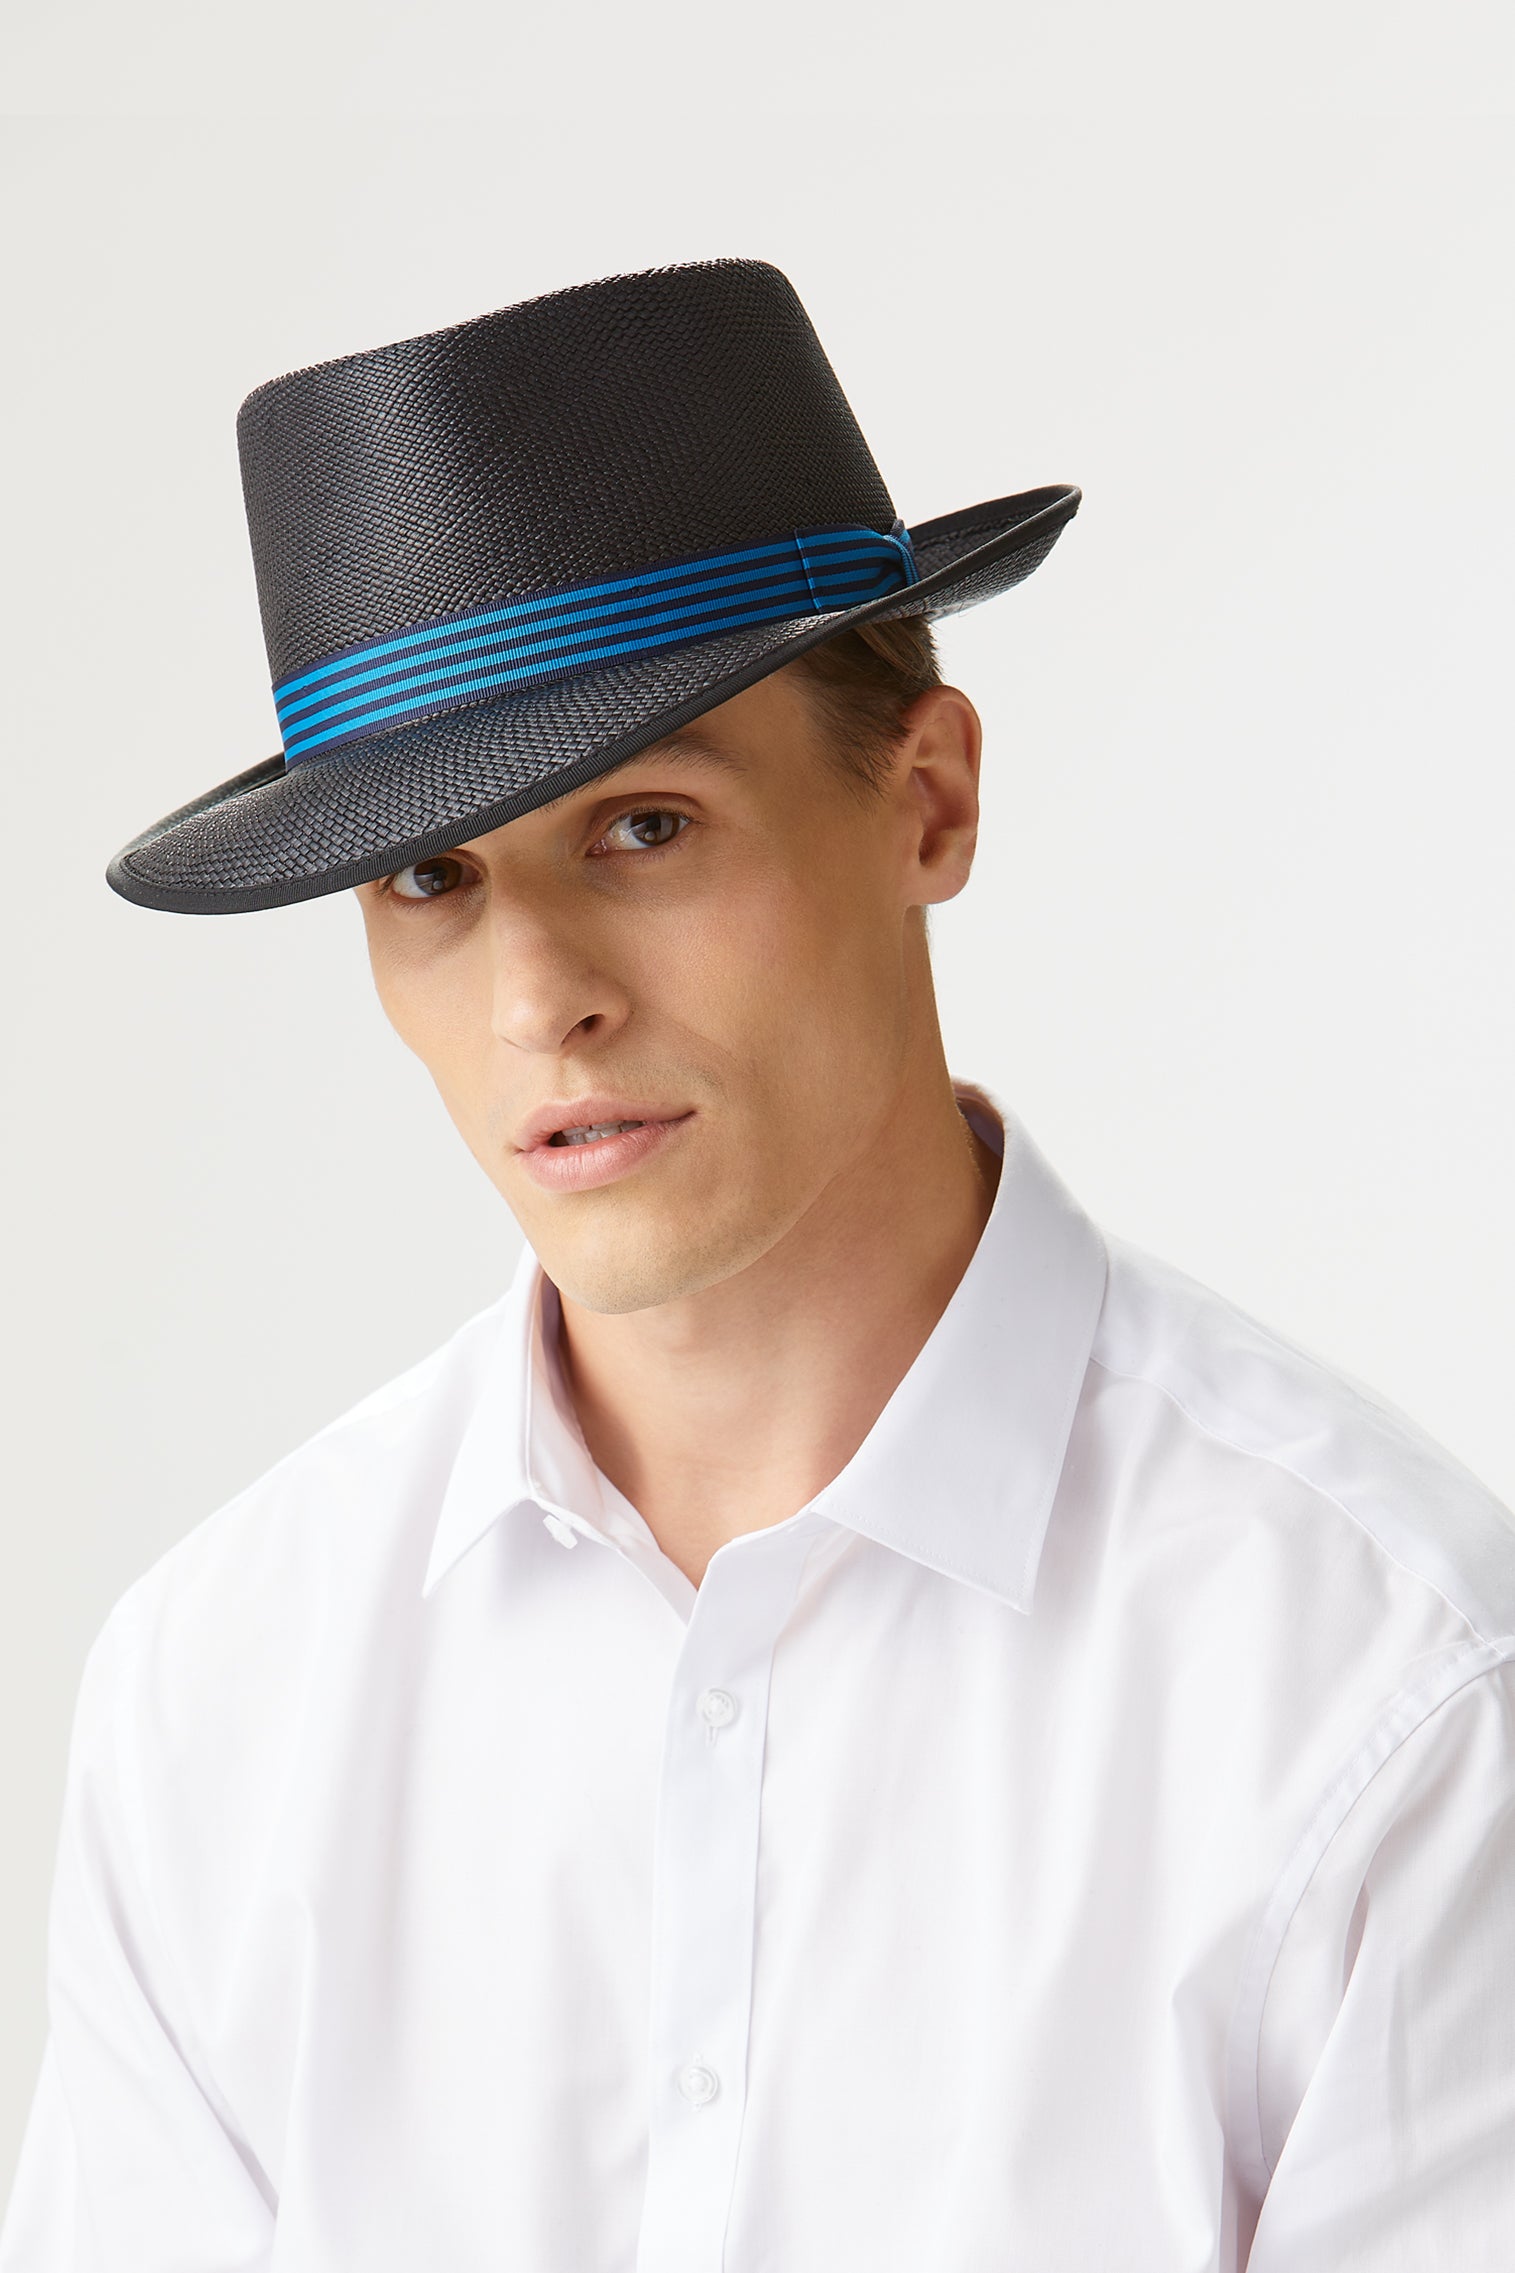 The Stoke - Panamas and Sun Hats for Men - Lock & Co. Hatters London UK